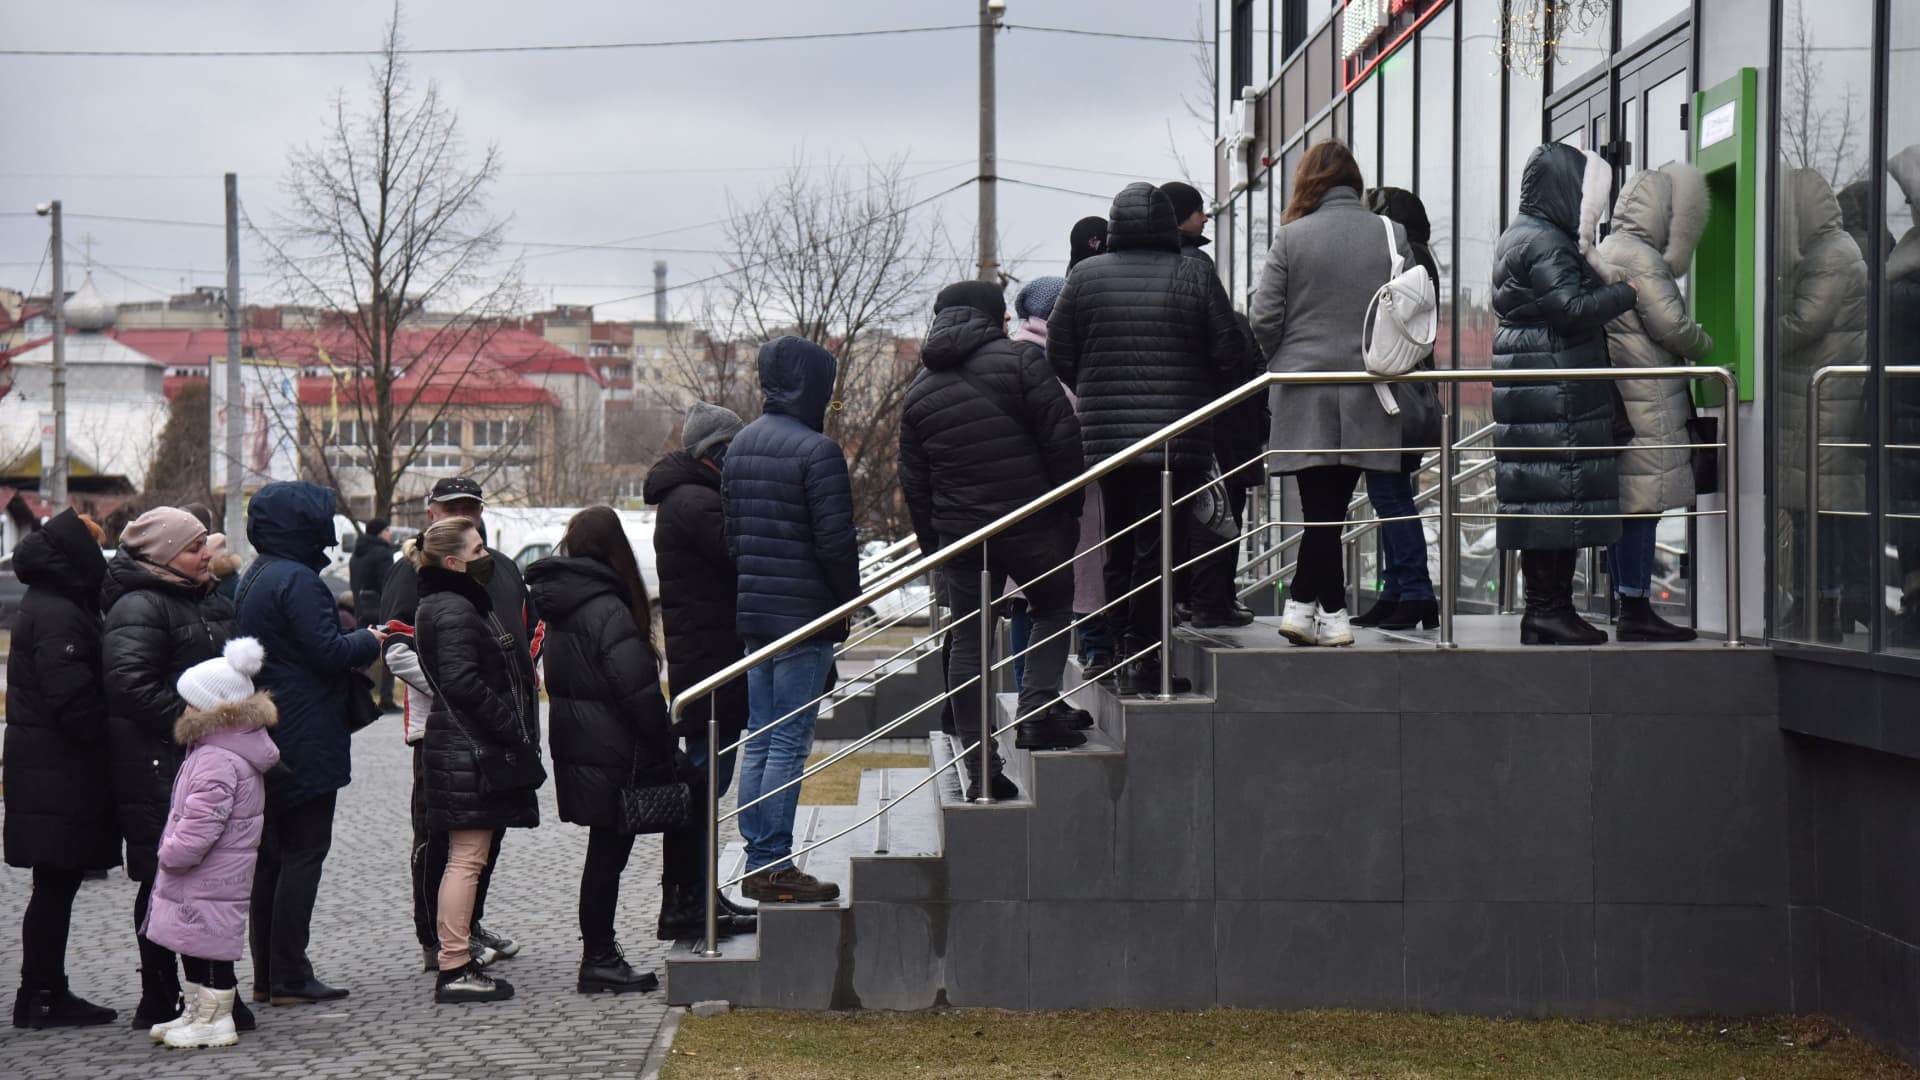 People queue at an ATM after Russian President Vladimir Putin authorized a military operation in eastern Ukraine, in Lviv, Ukraine February 24, 2022.